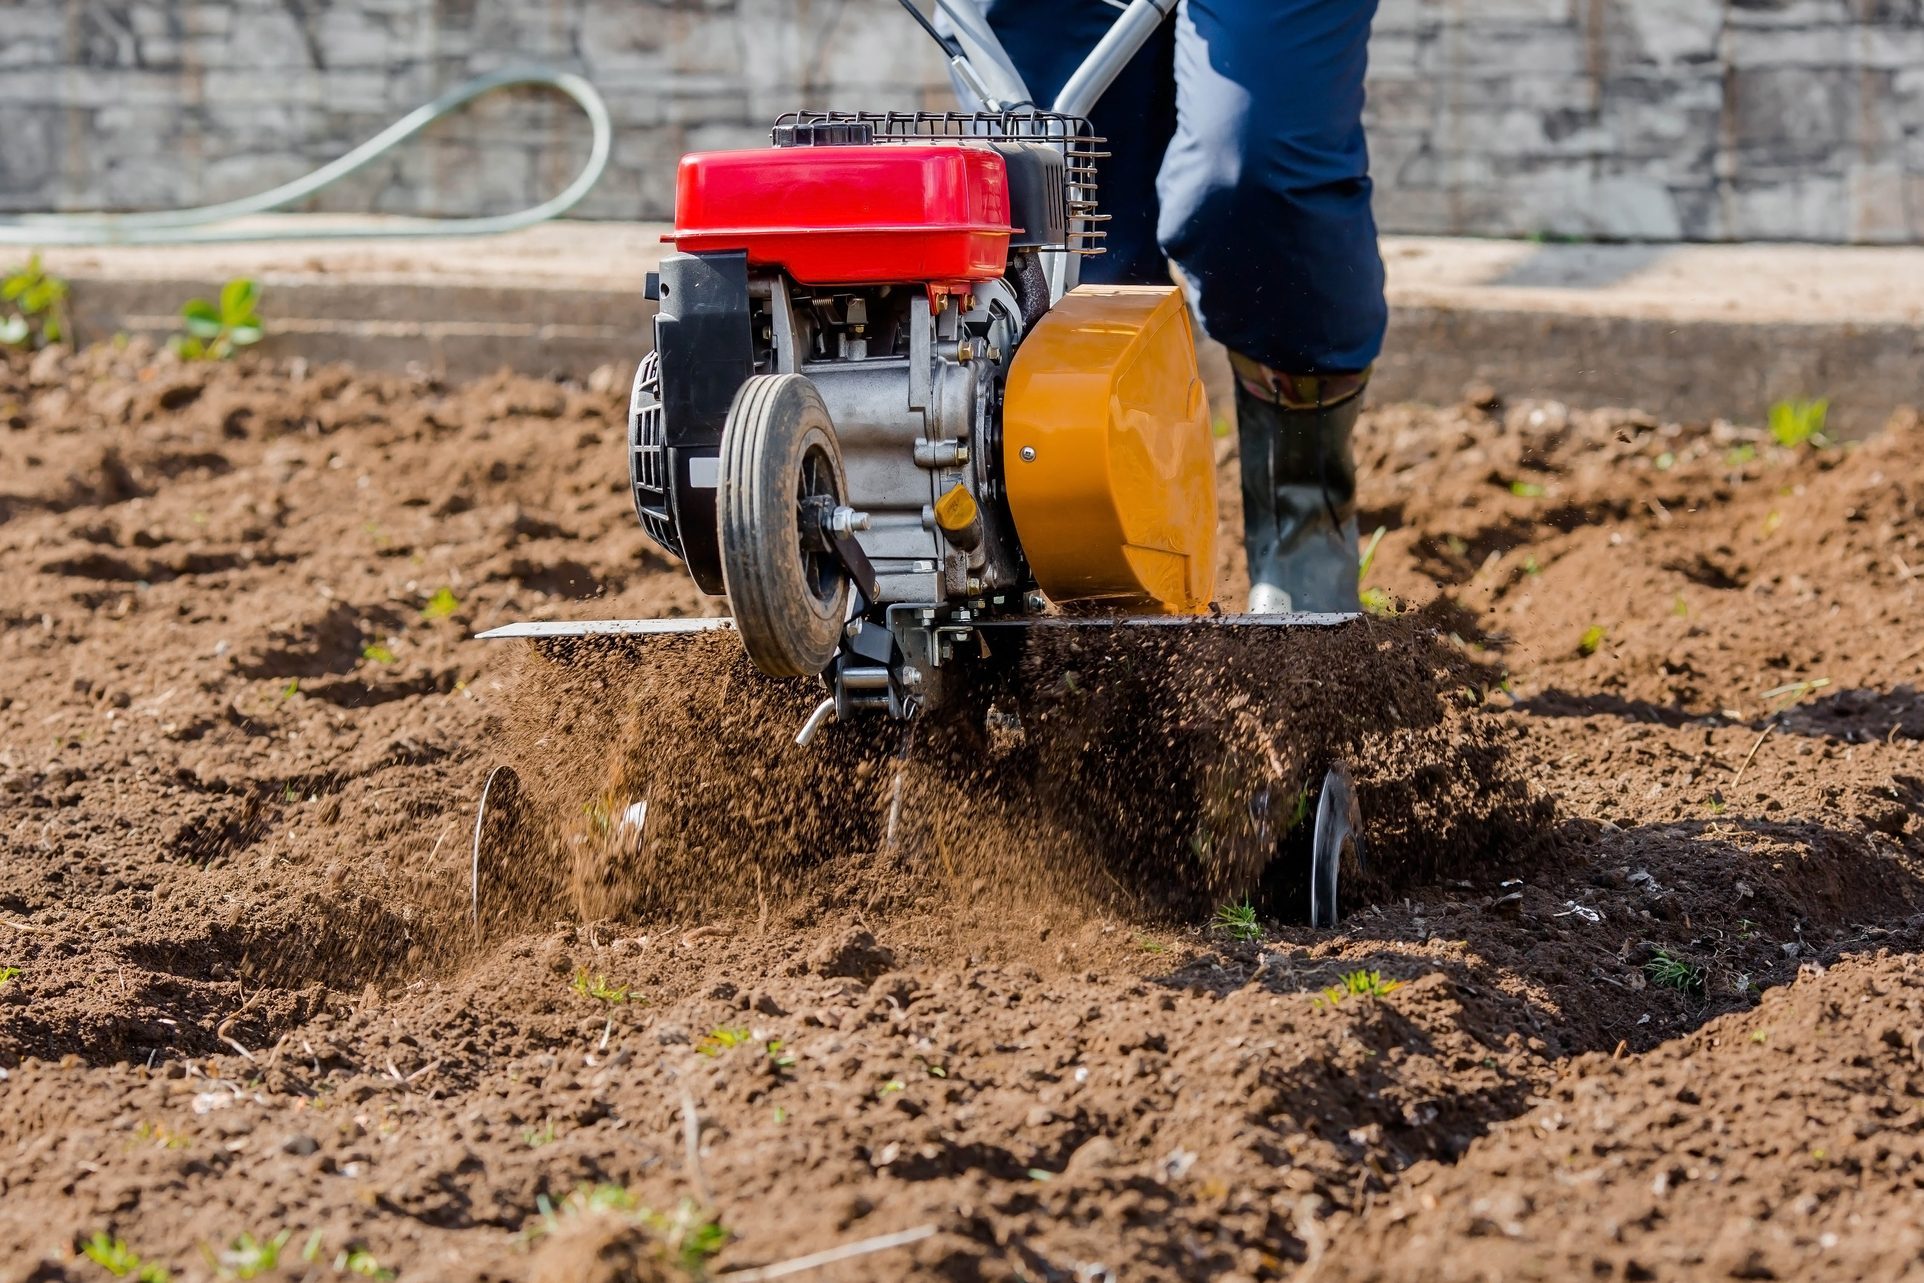  Garden Cultivator vs Tiller: Whats the Difference?